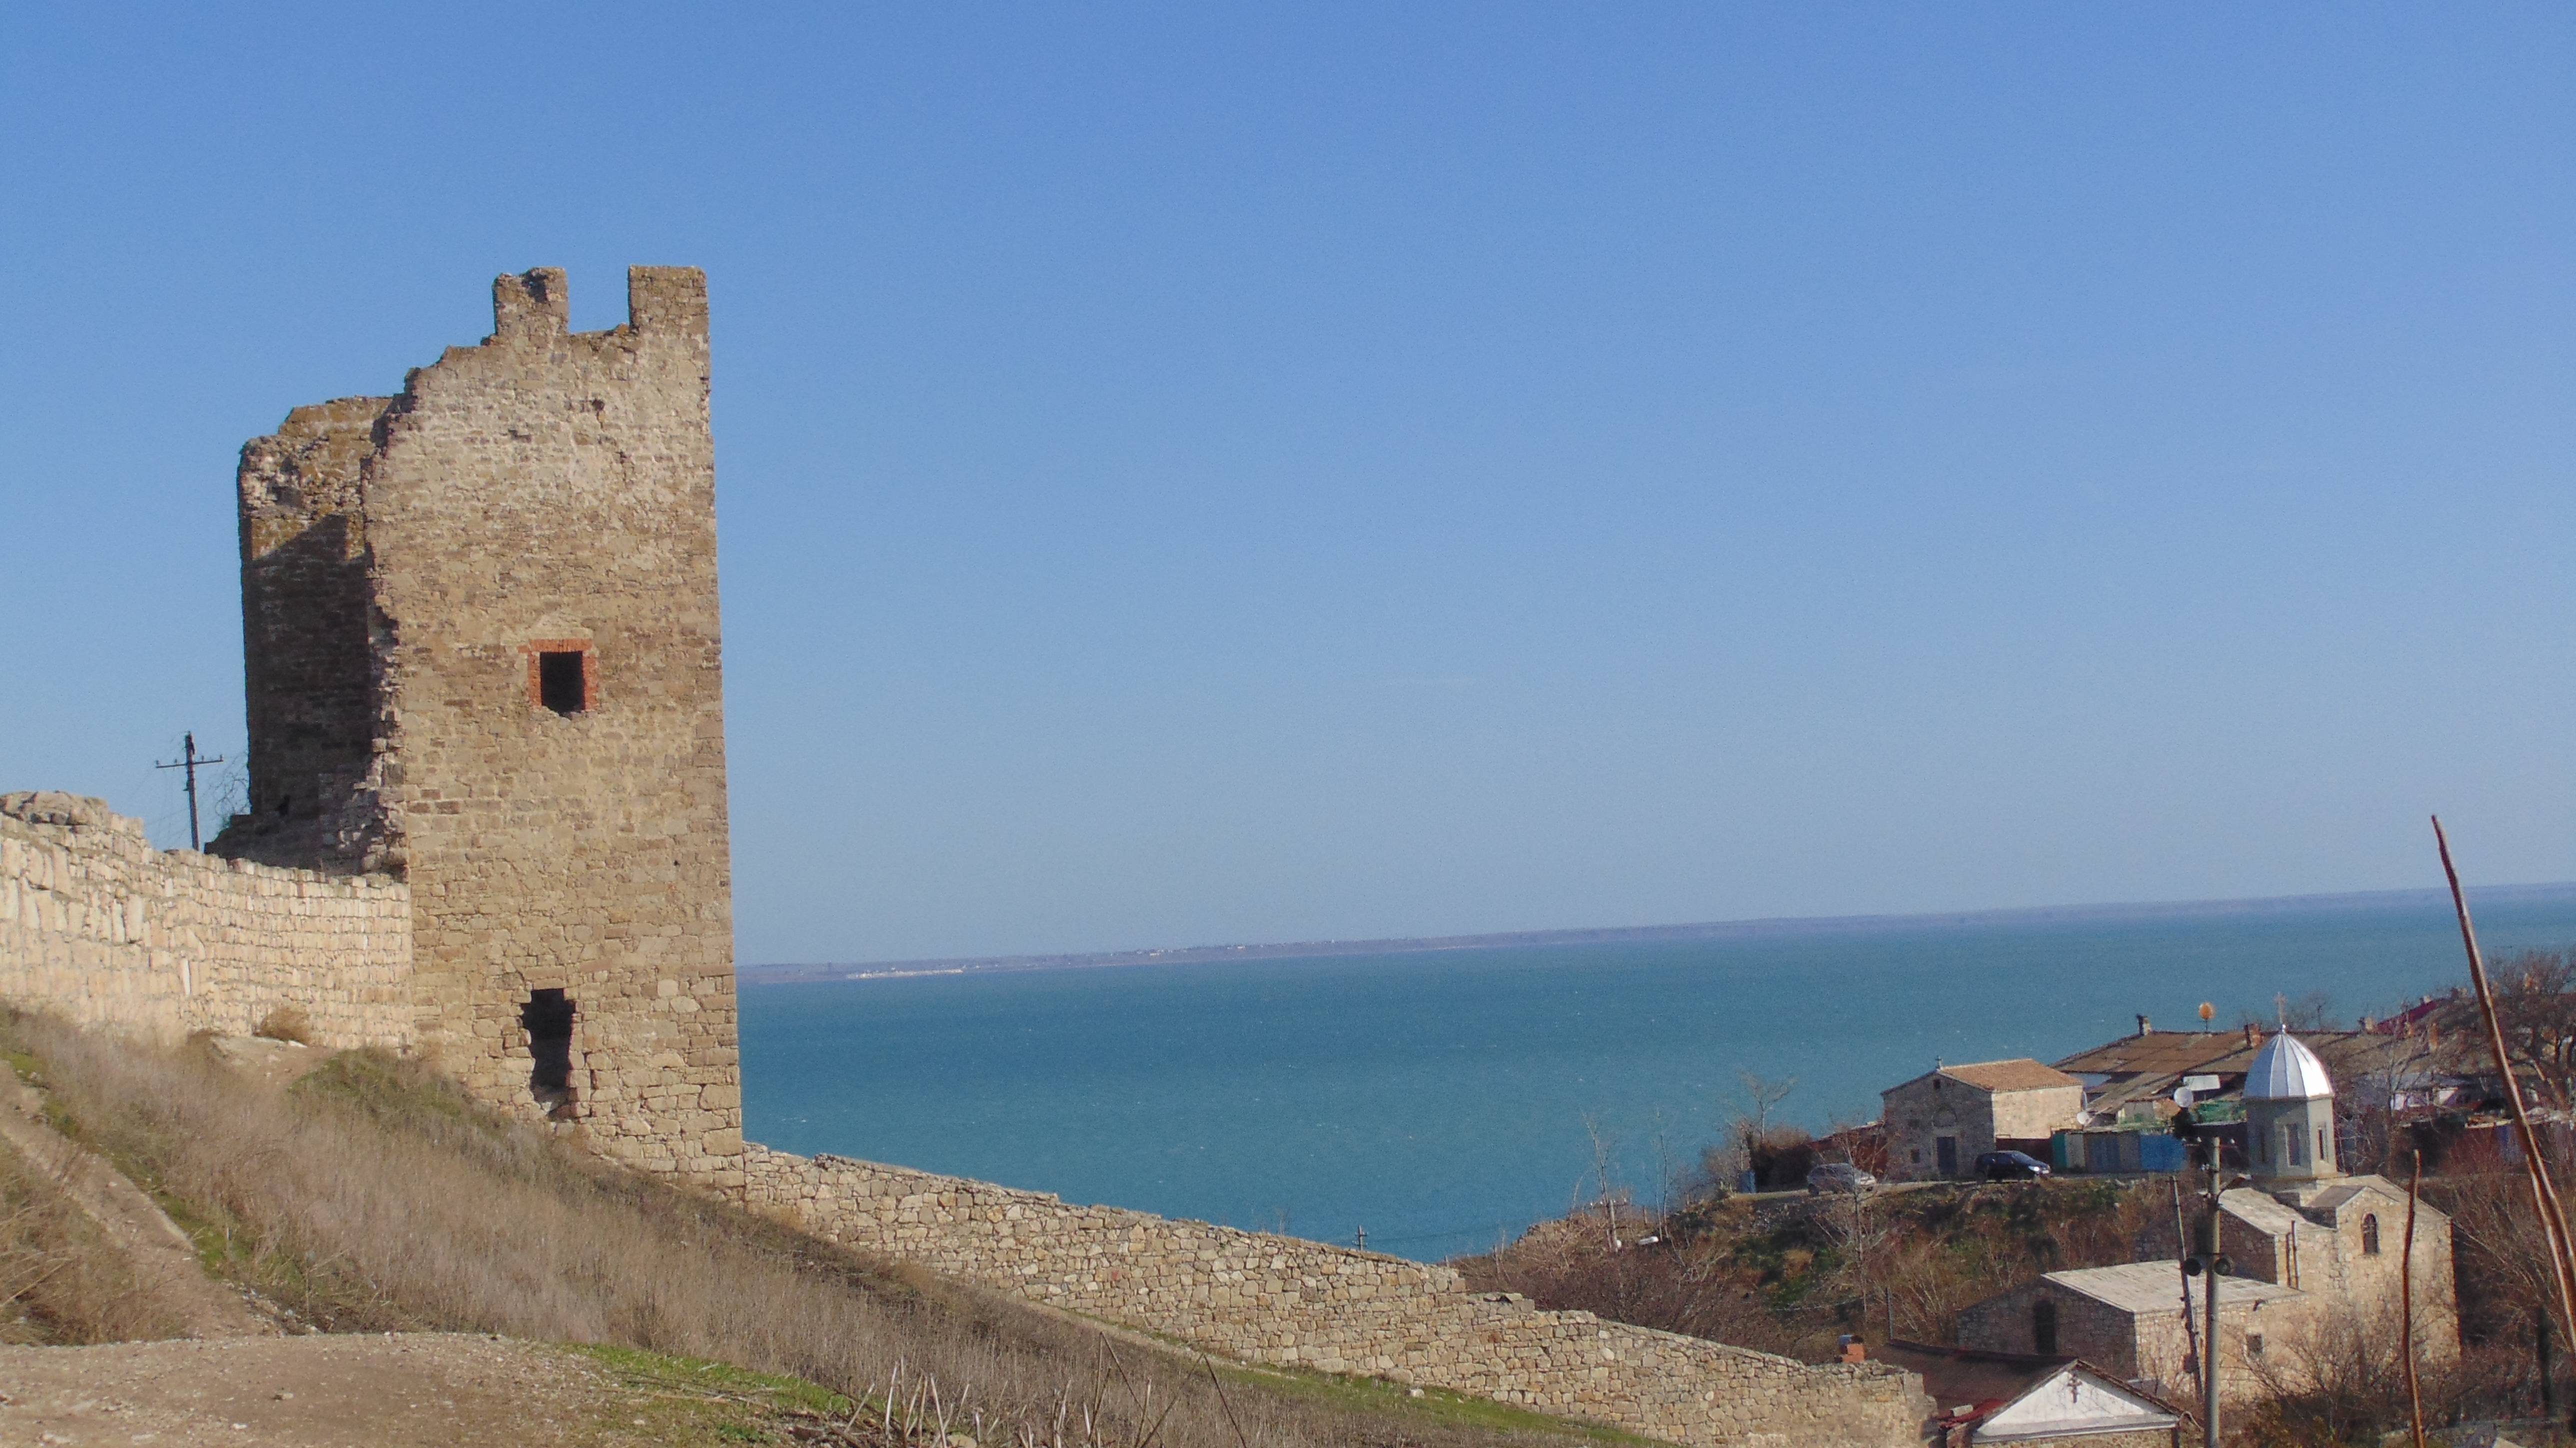 The old town of Feodosia